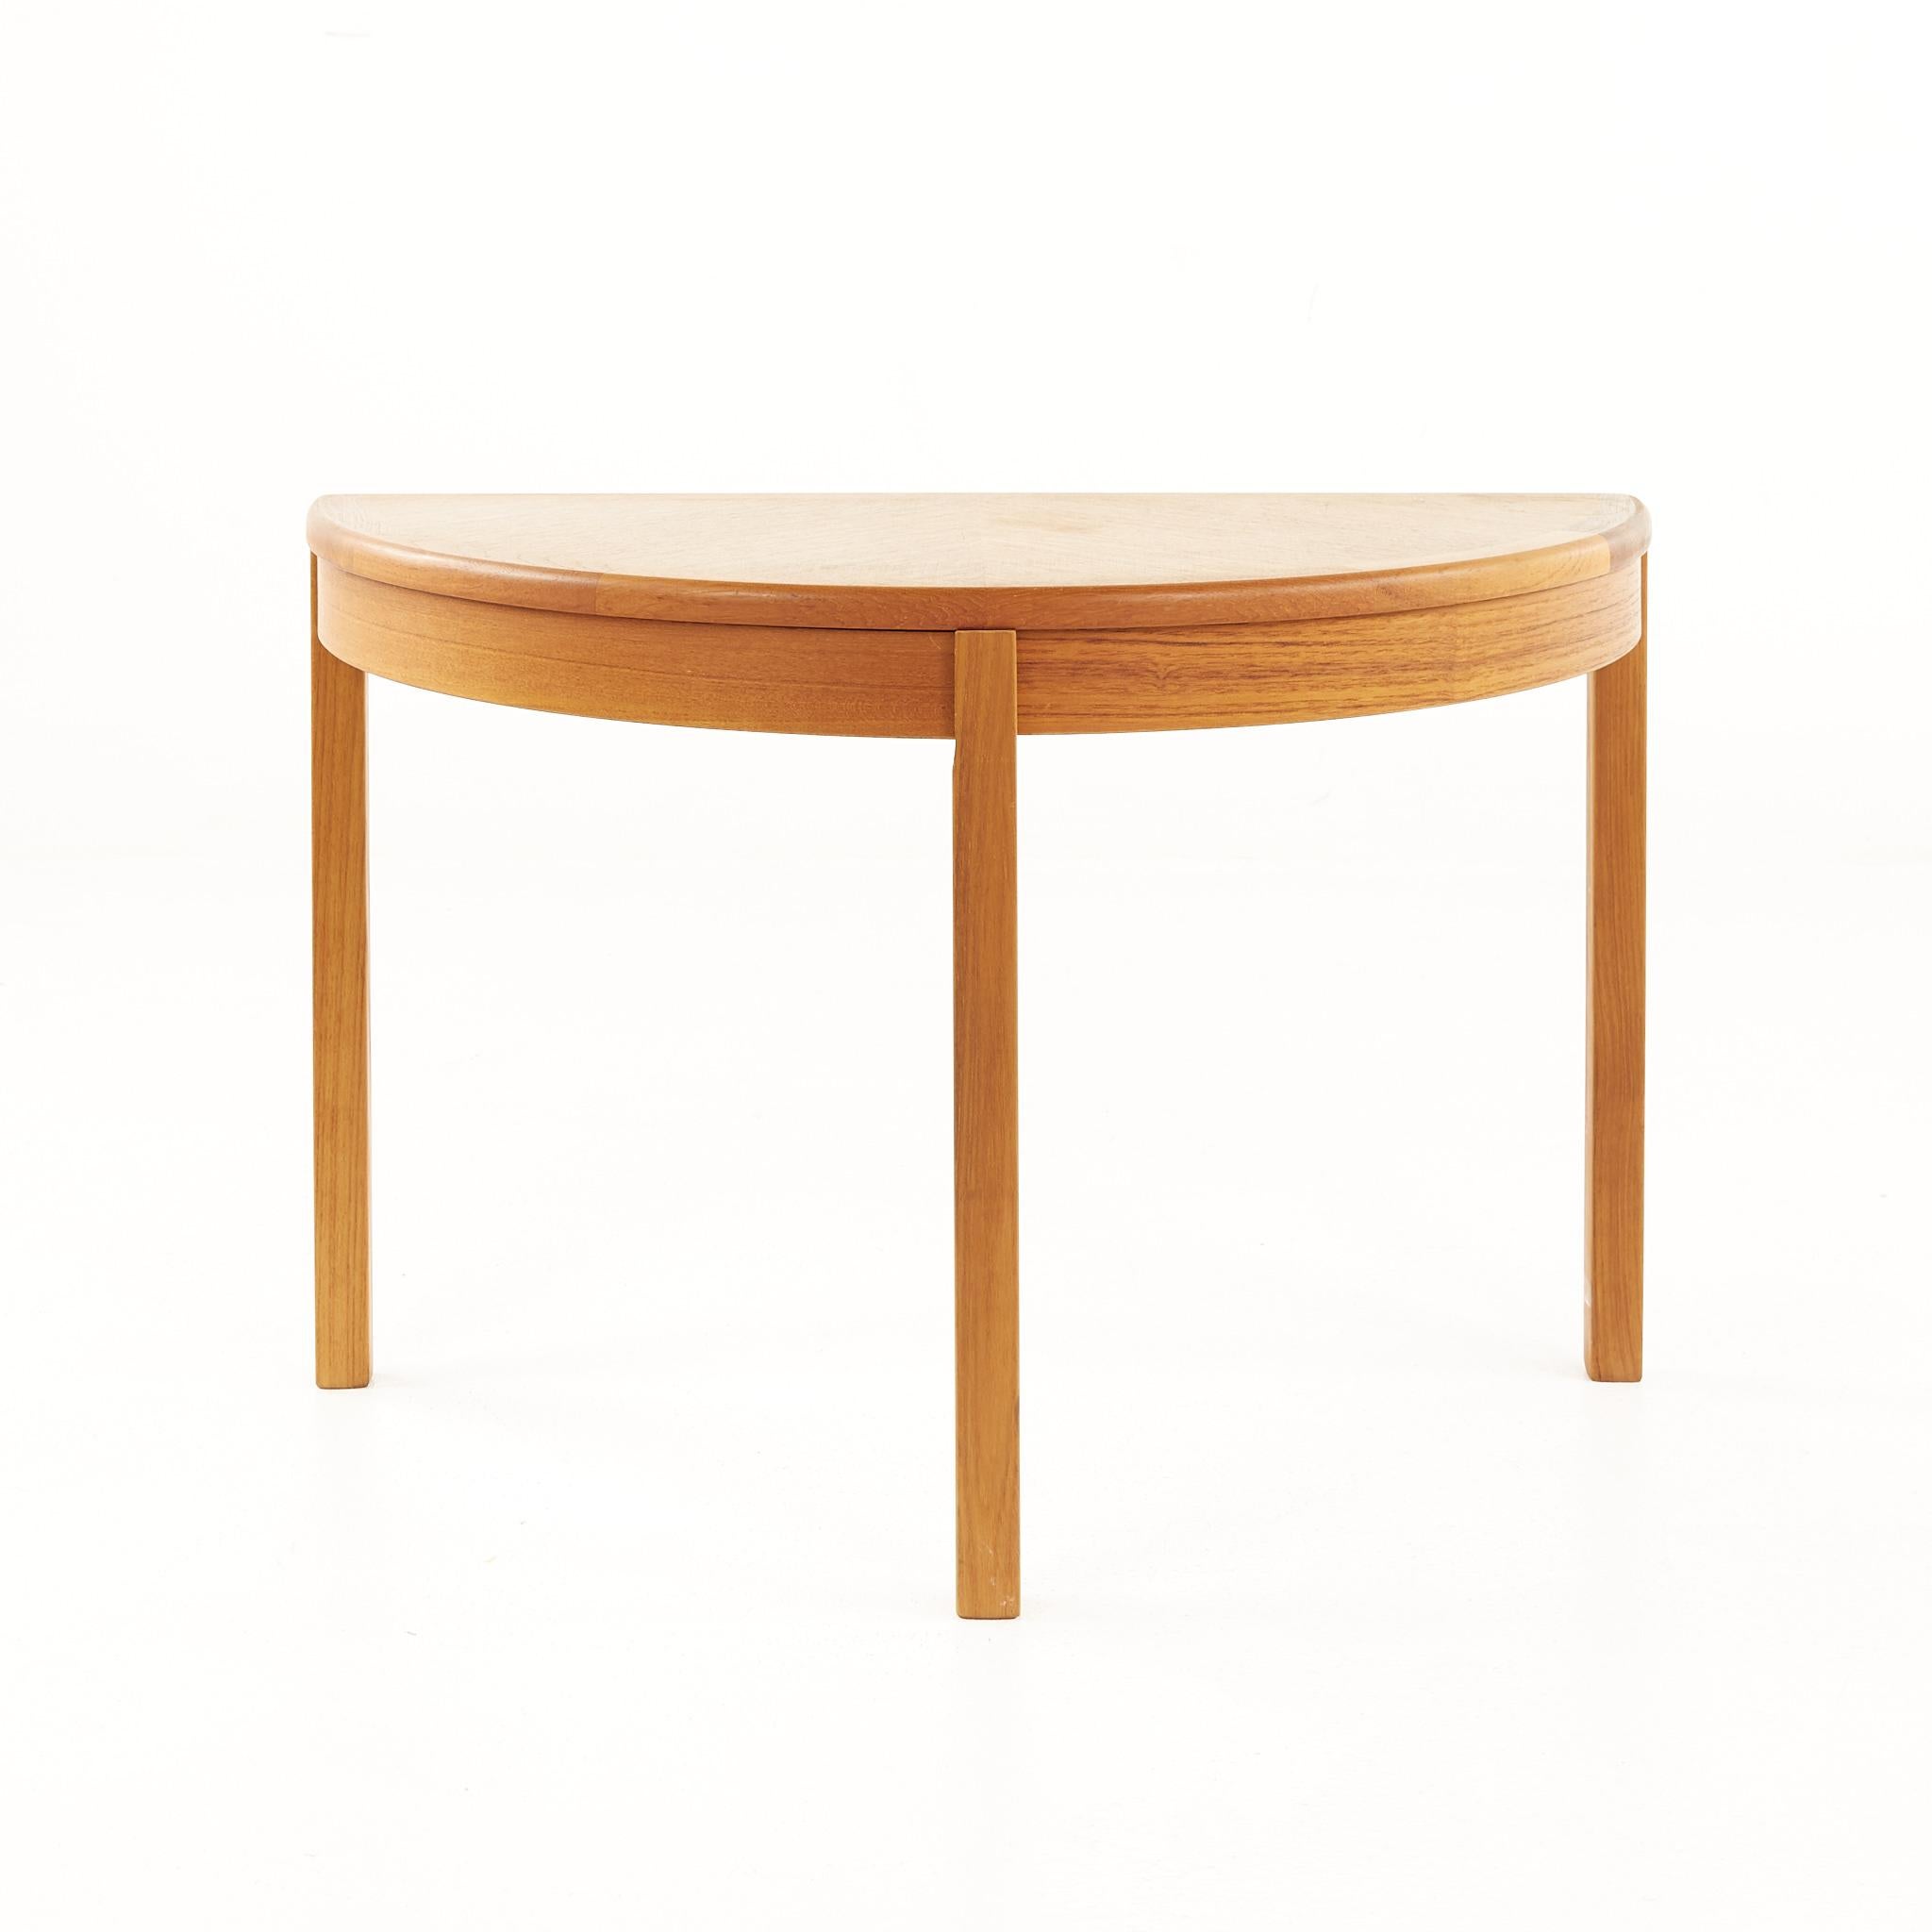 Mid century Danish teak half circle side table

This table measures: 29 wide x 15 deep x 19.5 inches high, with a chair clearance of 16.5 inches

All pieces of furniture can be had in what we call restored vintage condition. That means the piece